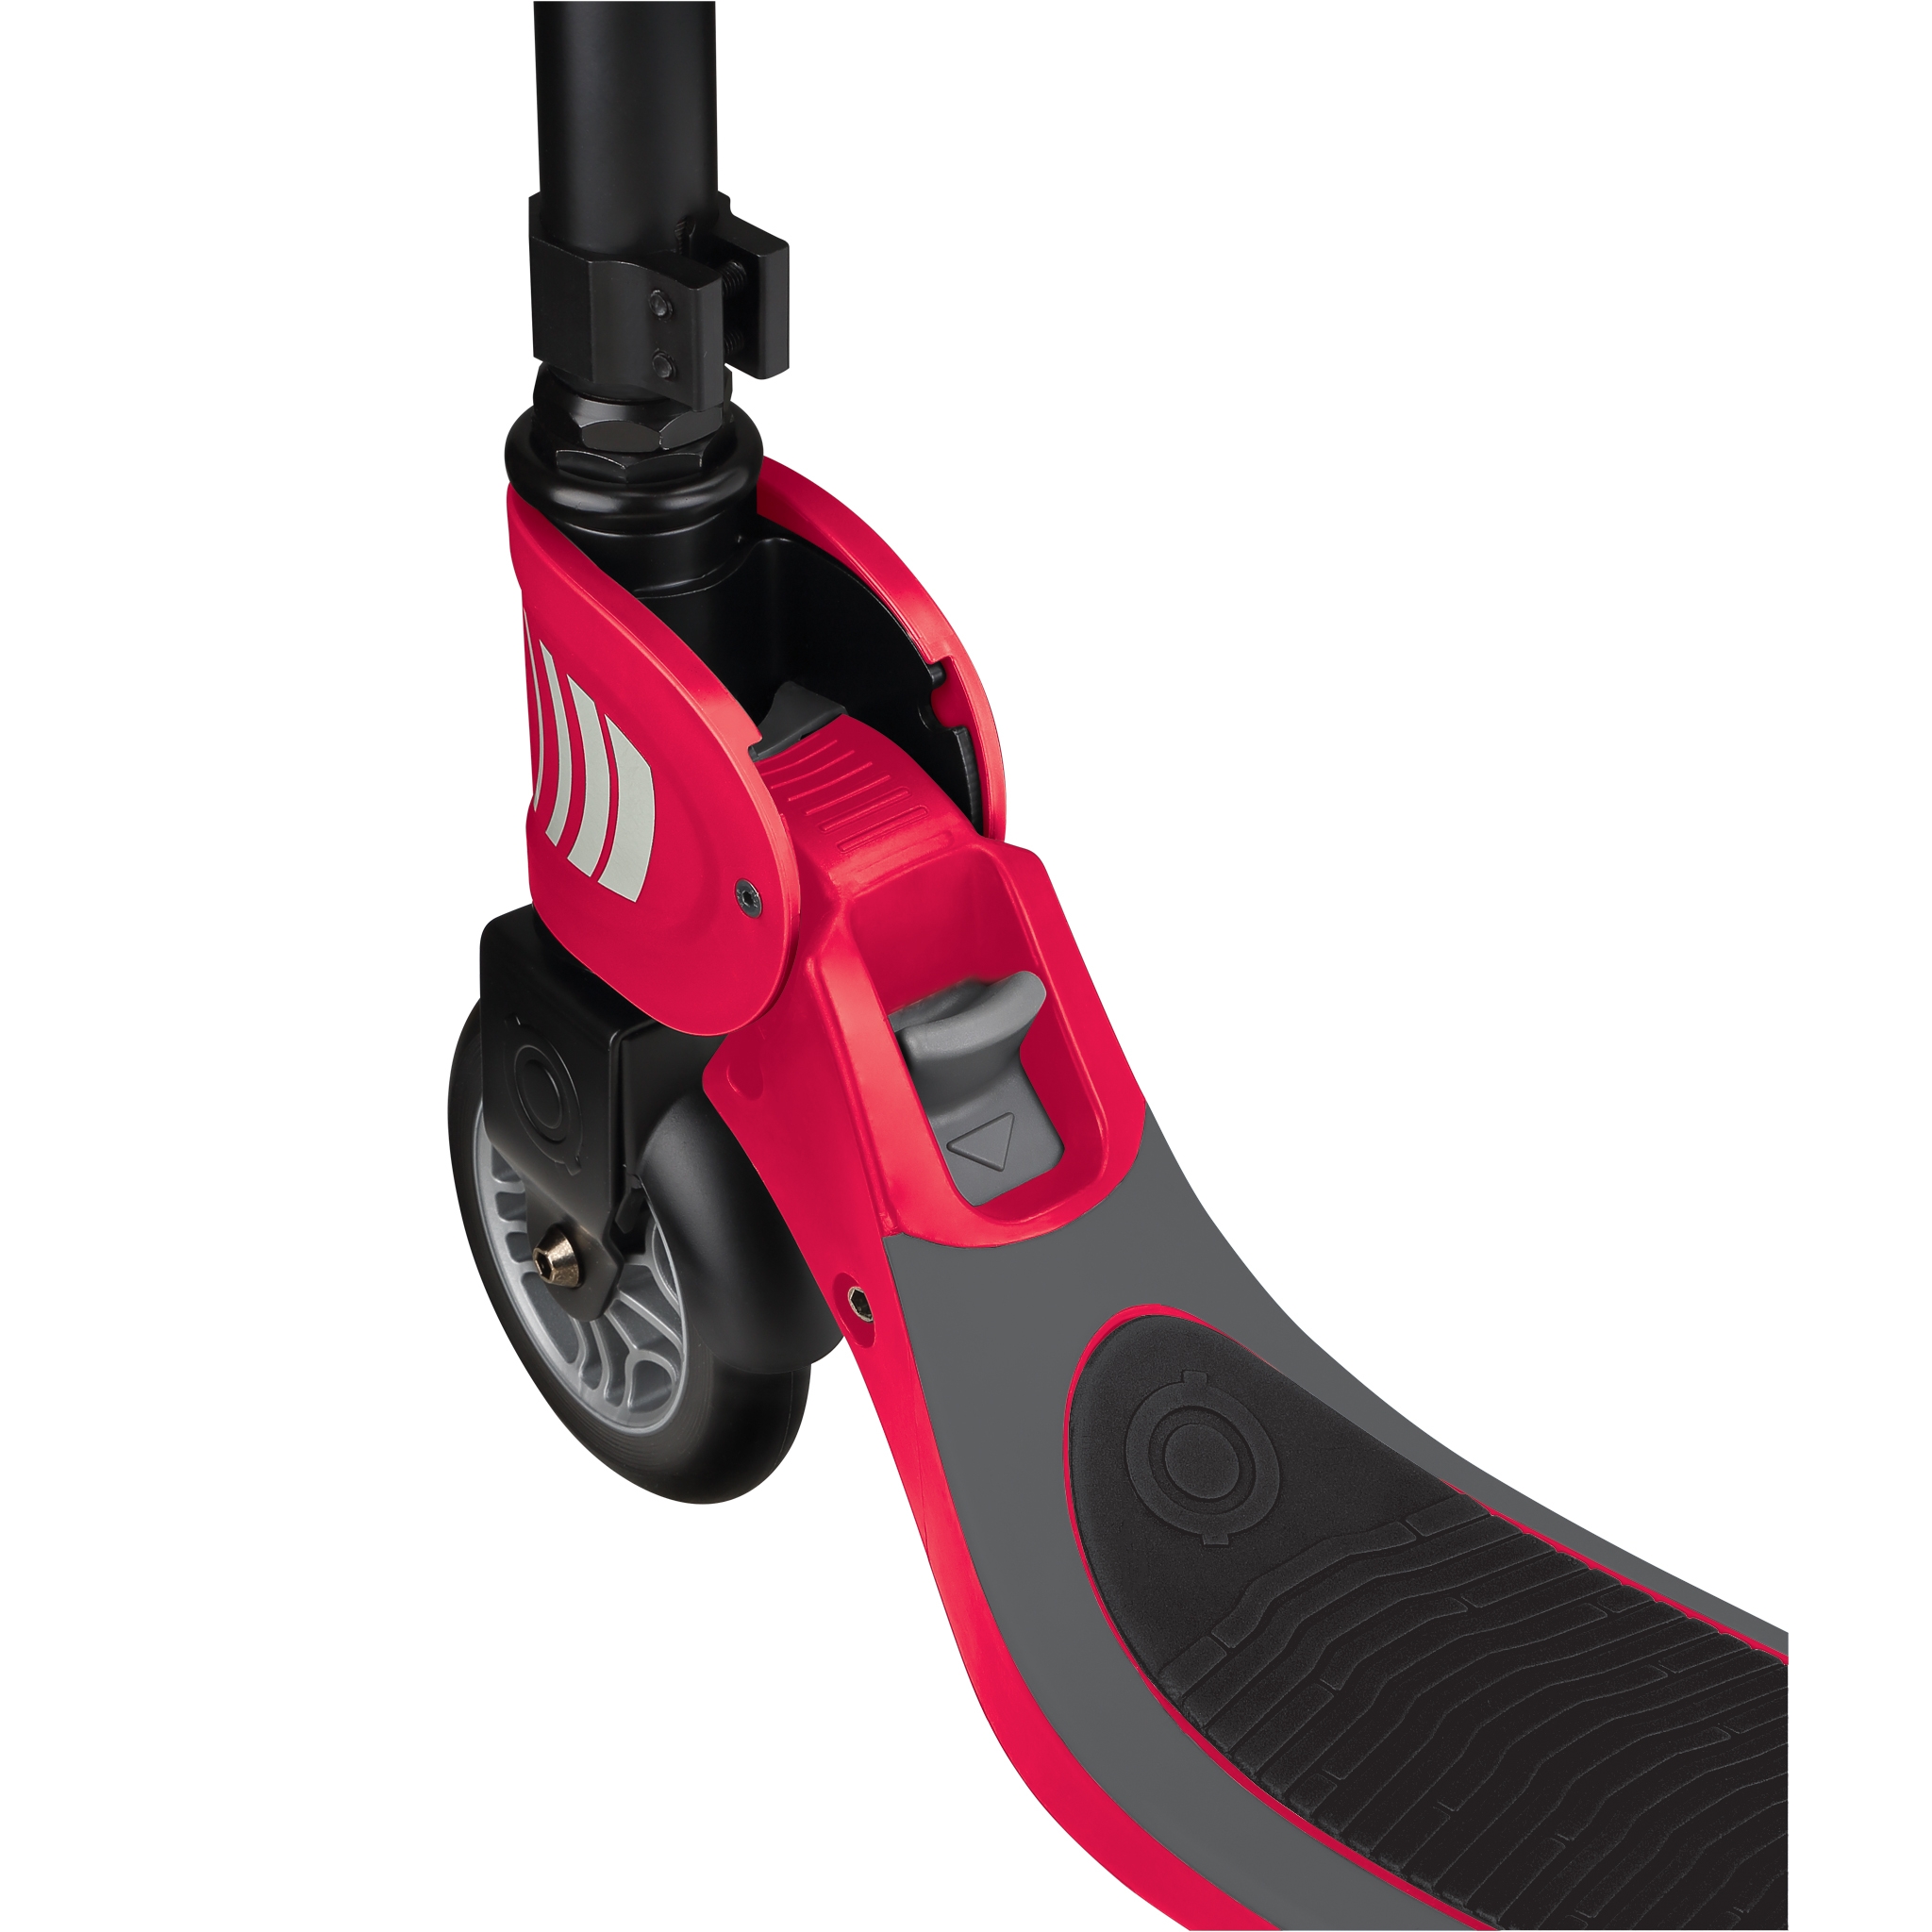 FLOW-FOLDABLE-125-2-wheel-folding-scooter-with-push-button-new-red 4